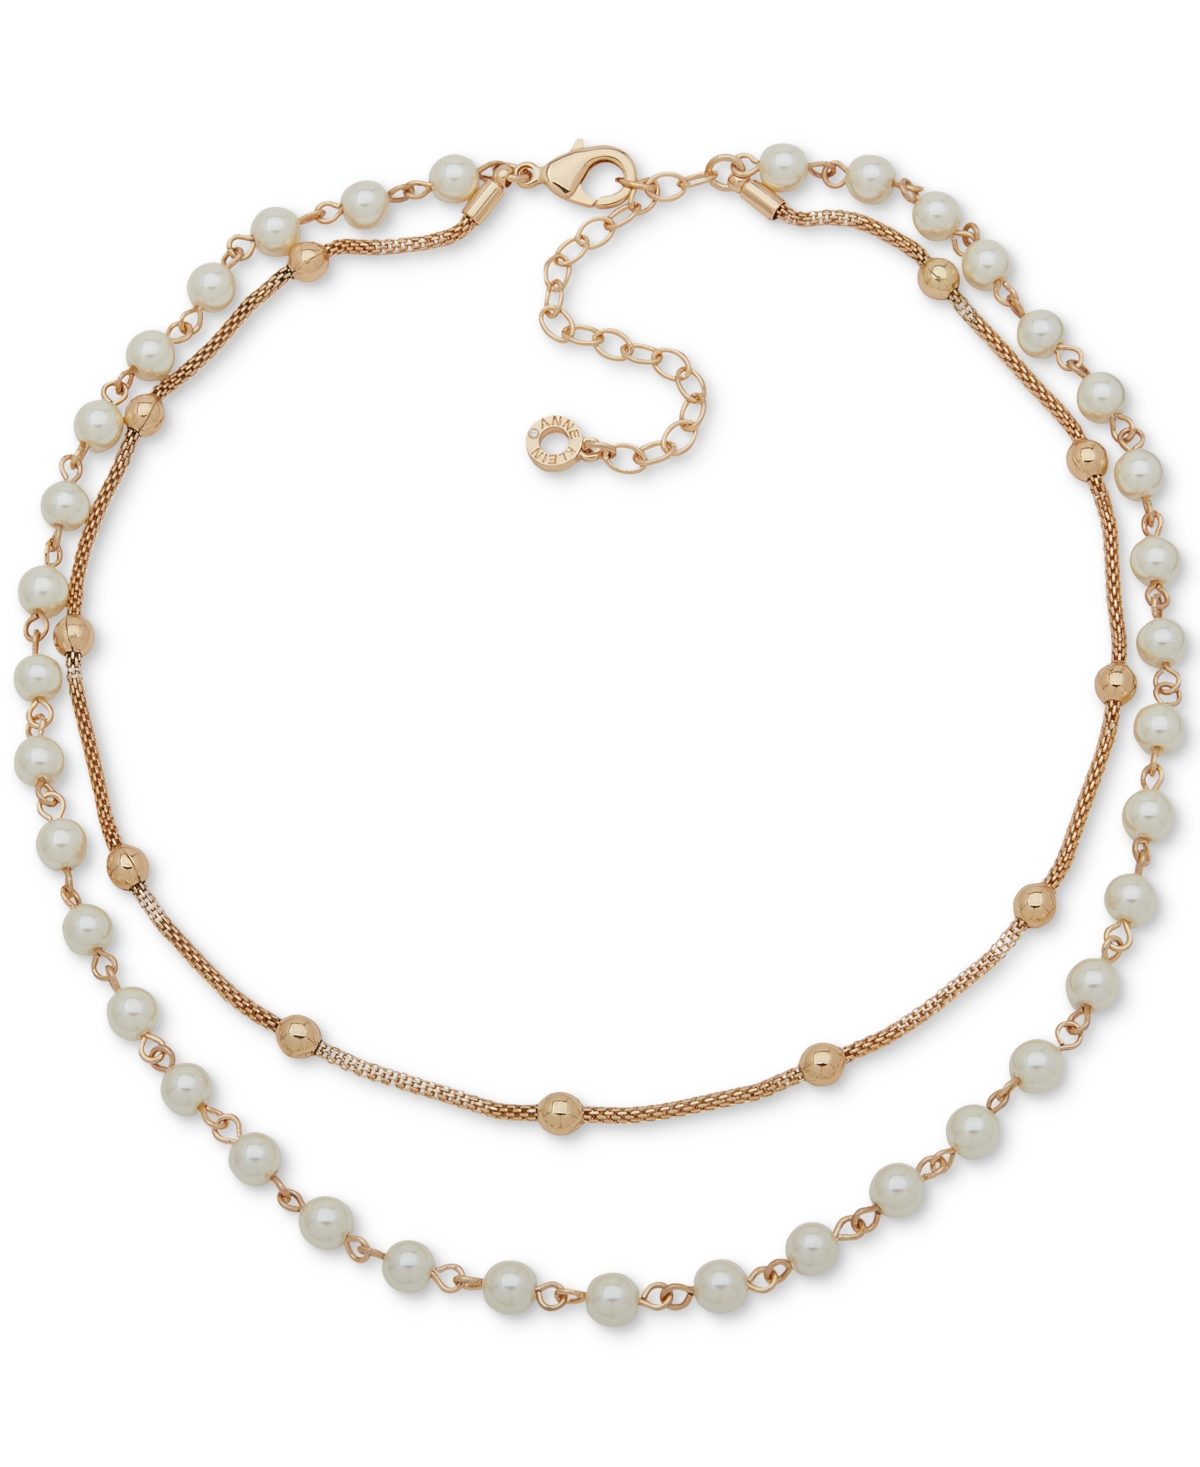 Anne Klein Gold-tone Imitation-pearl Multi-row Necklace, 16" + 3" Extender In Crystal